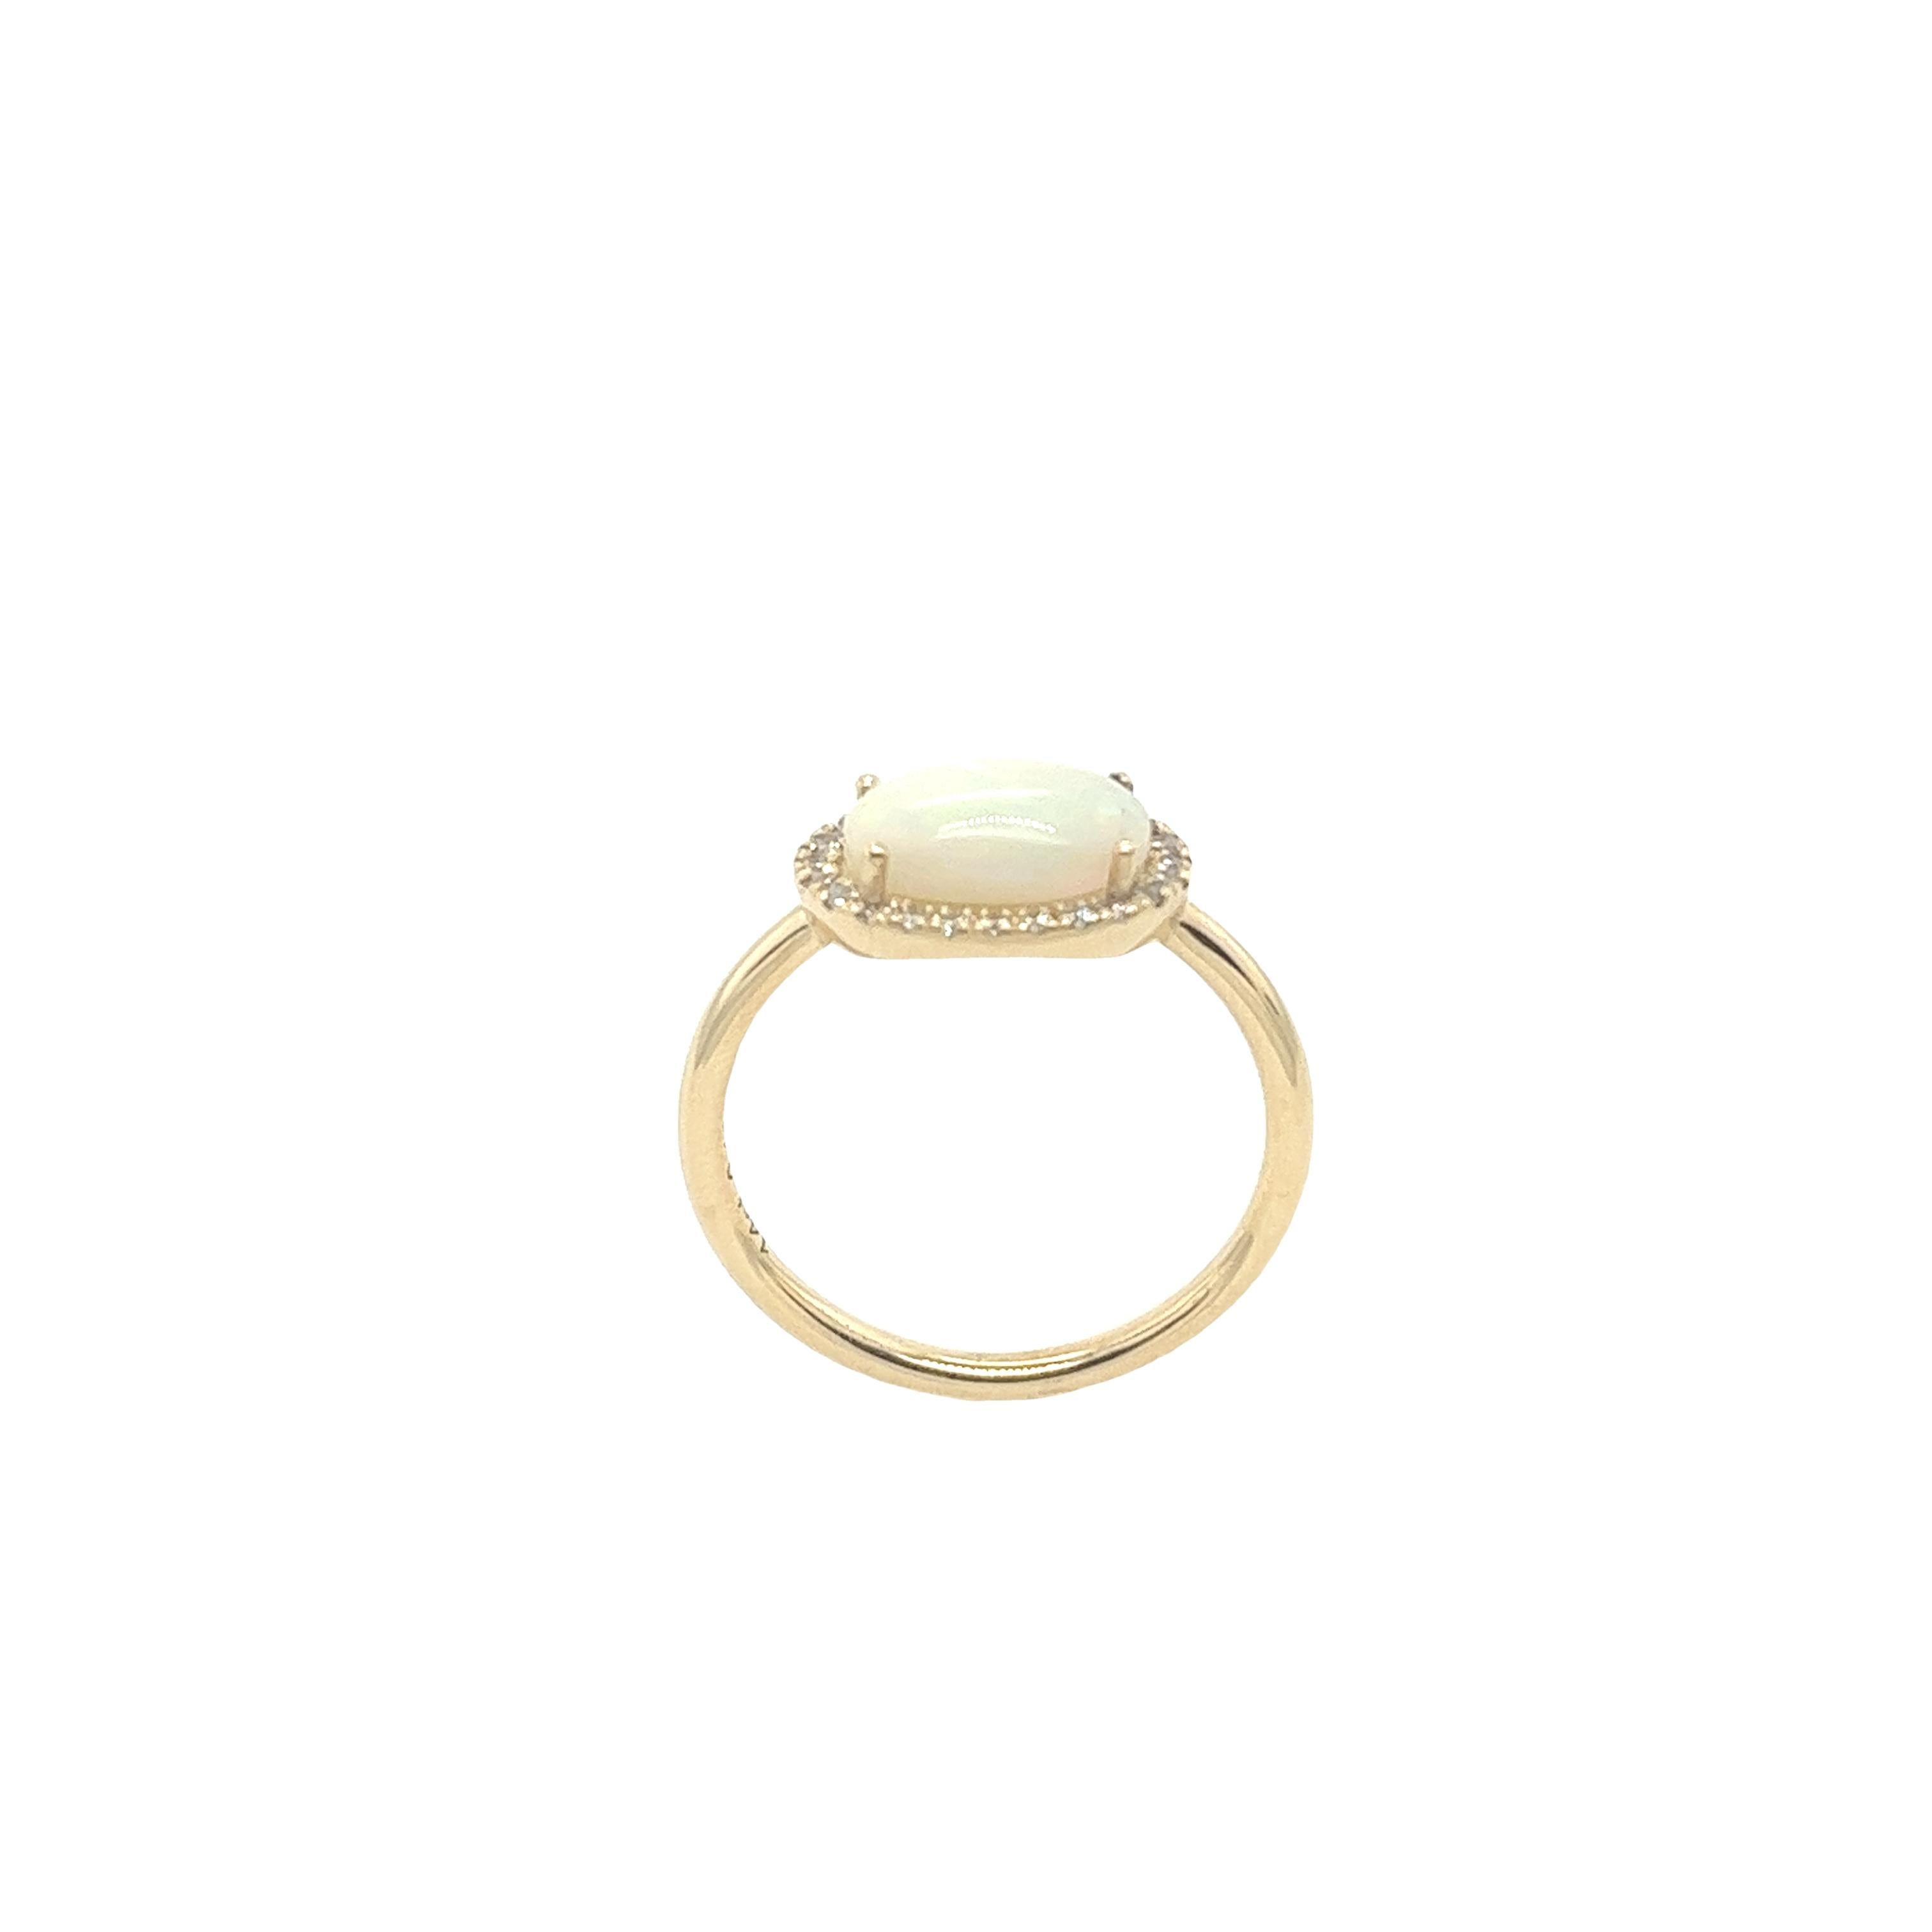 Our classic oval cabochon opal ring surrounded by 24 dazzling small diamonds, set in exquisite 14ct yellow gold setting.
Total Weight: 2.4g
Total Opal weight: 1.83ct
Total Diamond Weight: 0.16ct
Diamond Colour: H
Diamond Clarity: SI1
Ring Size: